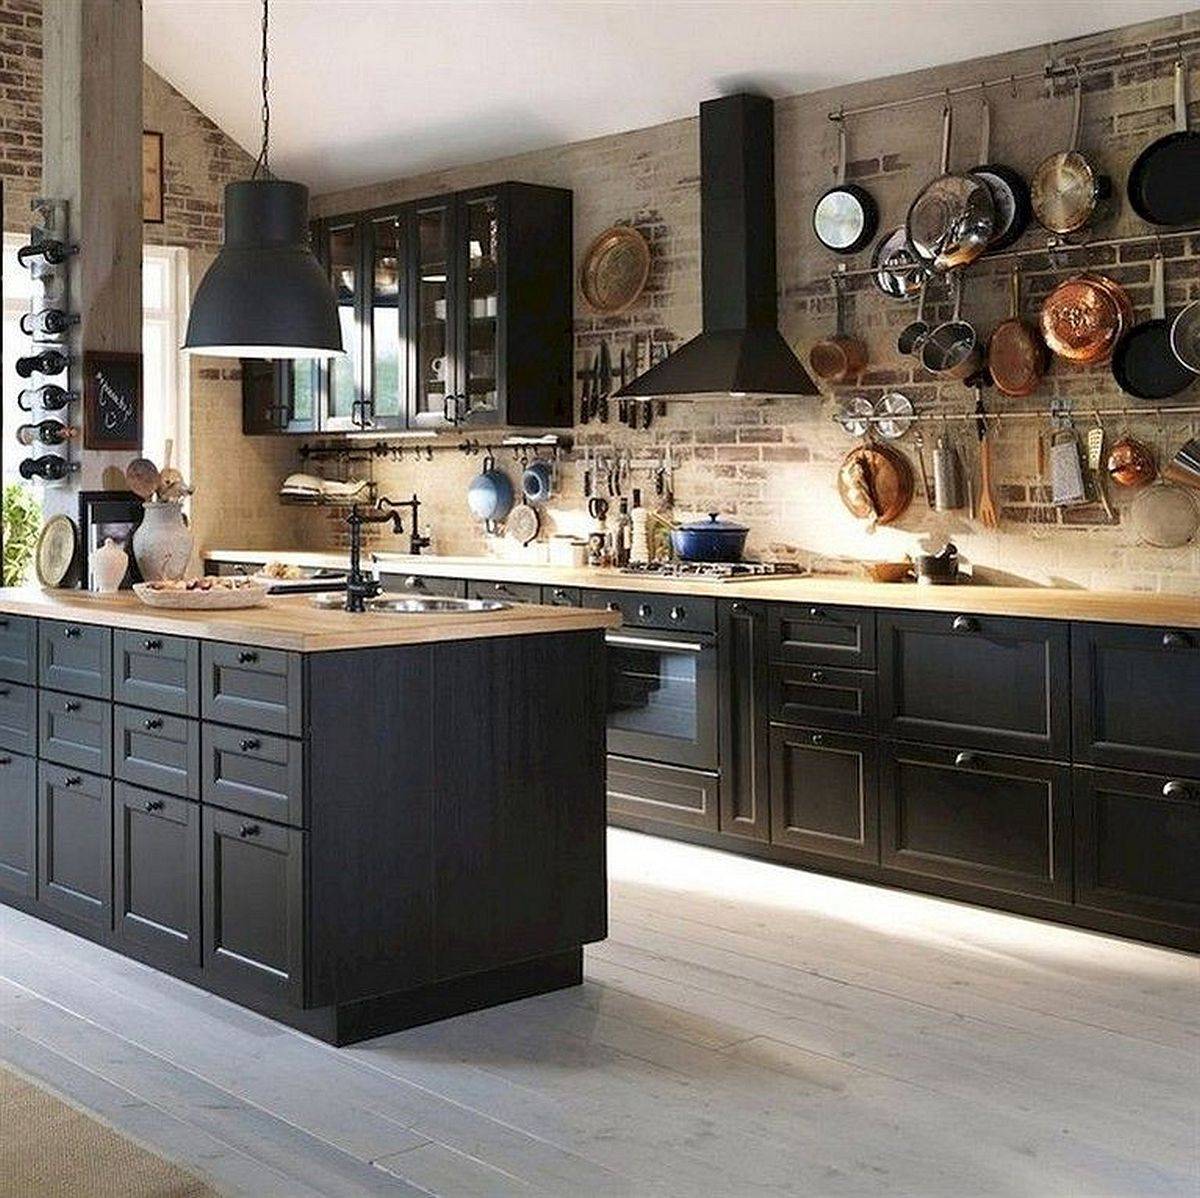 Timeless-kitchen-with-brick-walls-and-black-wood-cabinets-along-with-wooden-countertops-82921